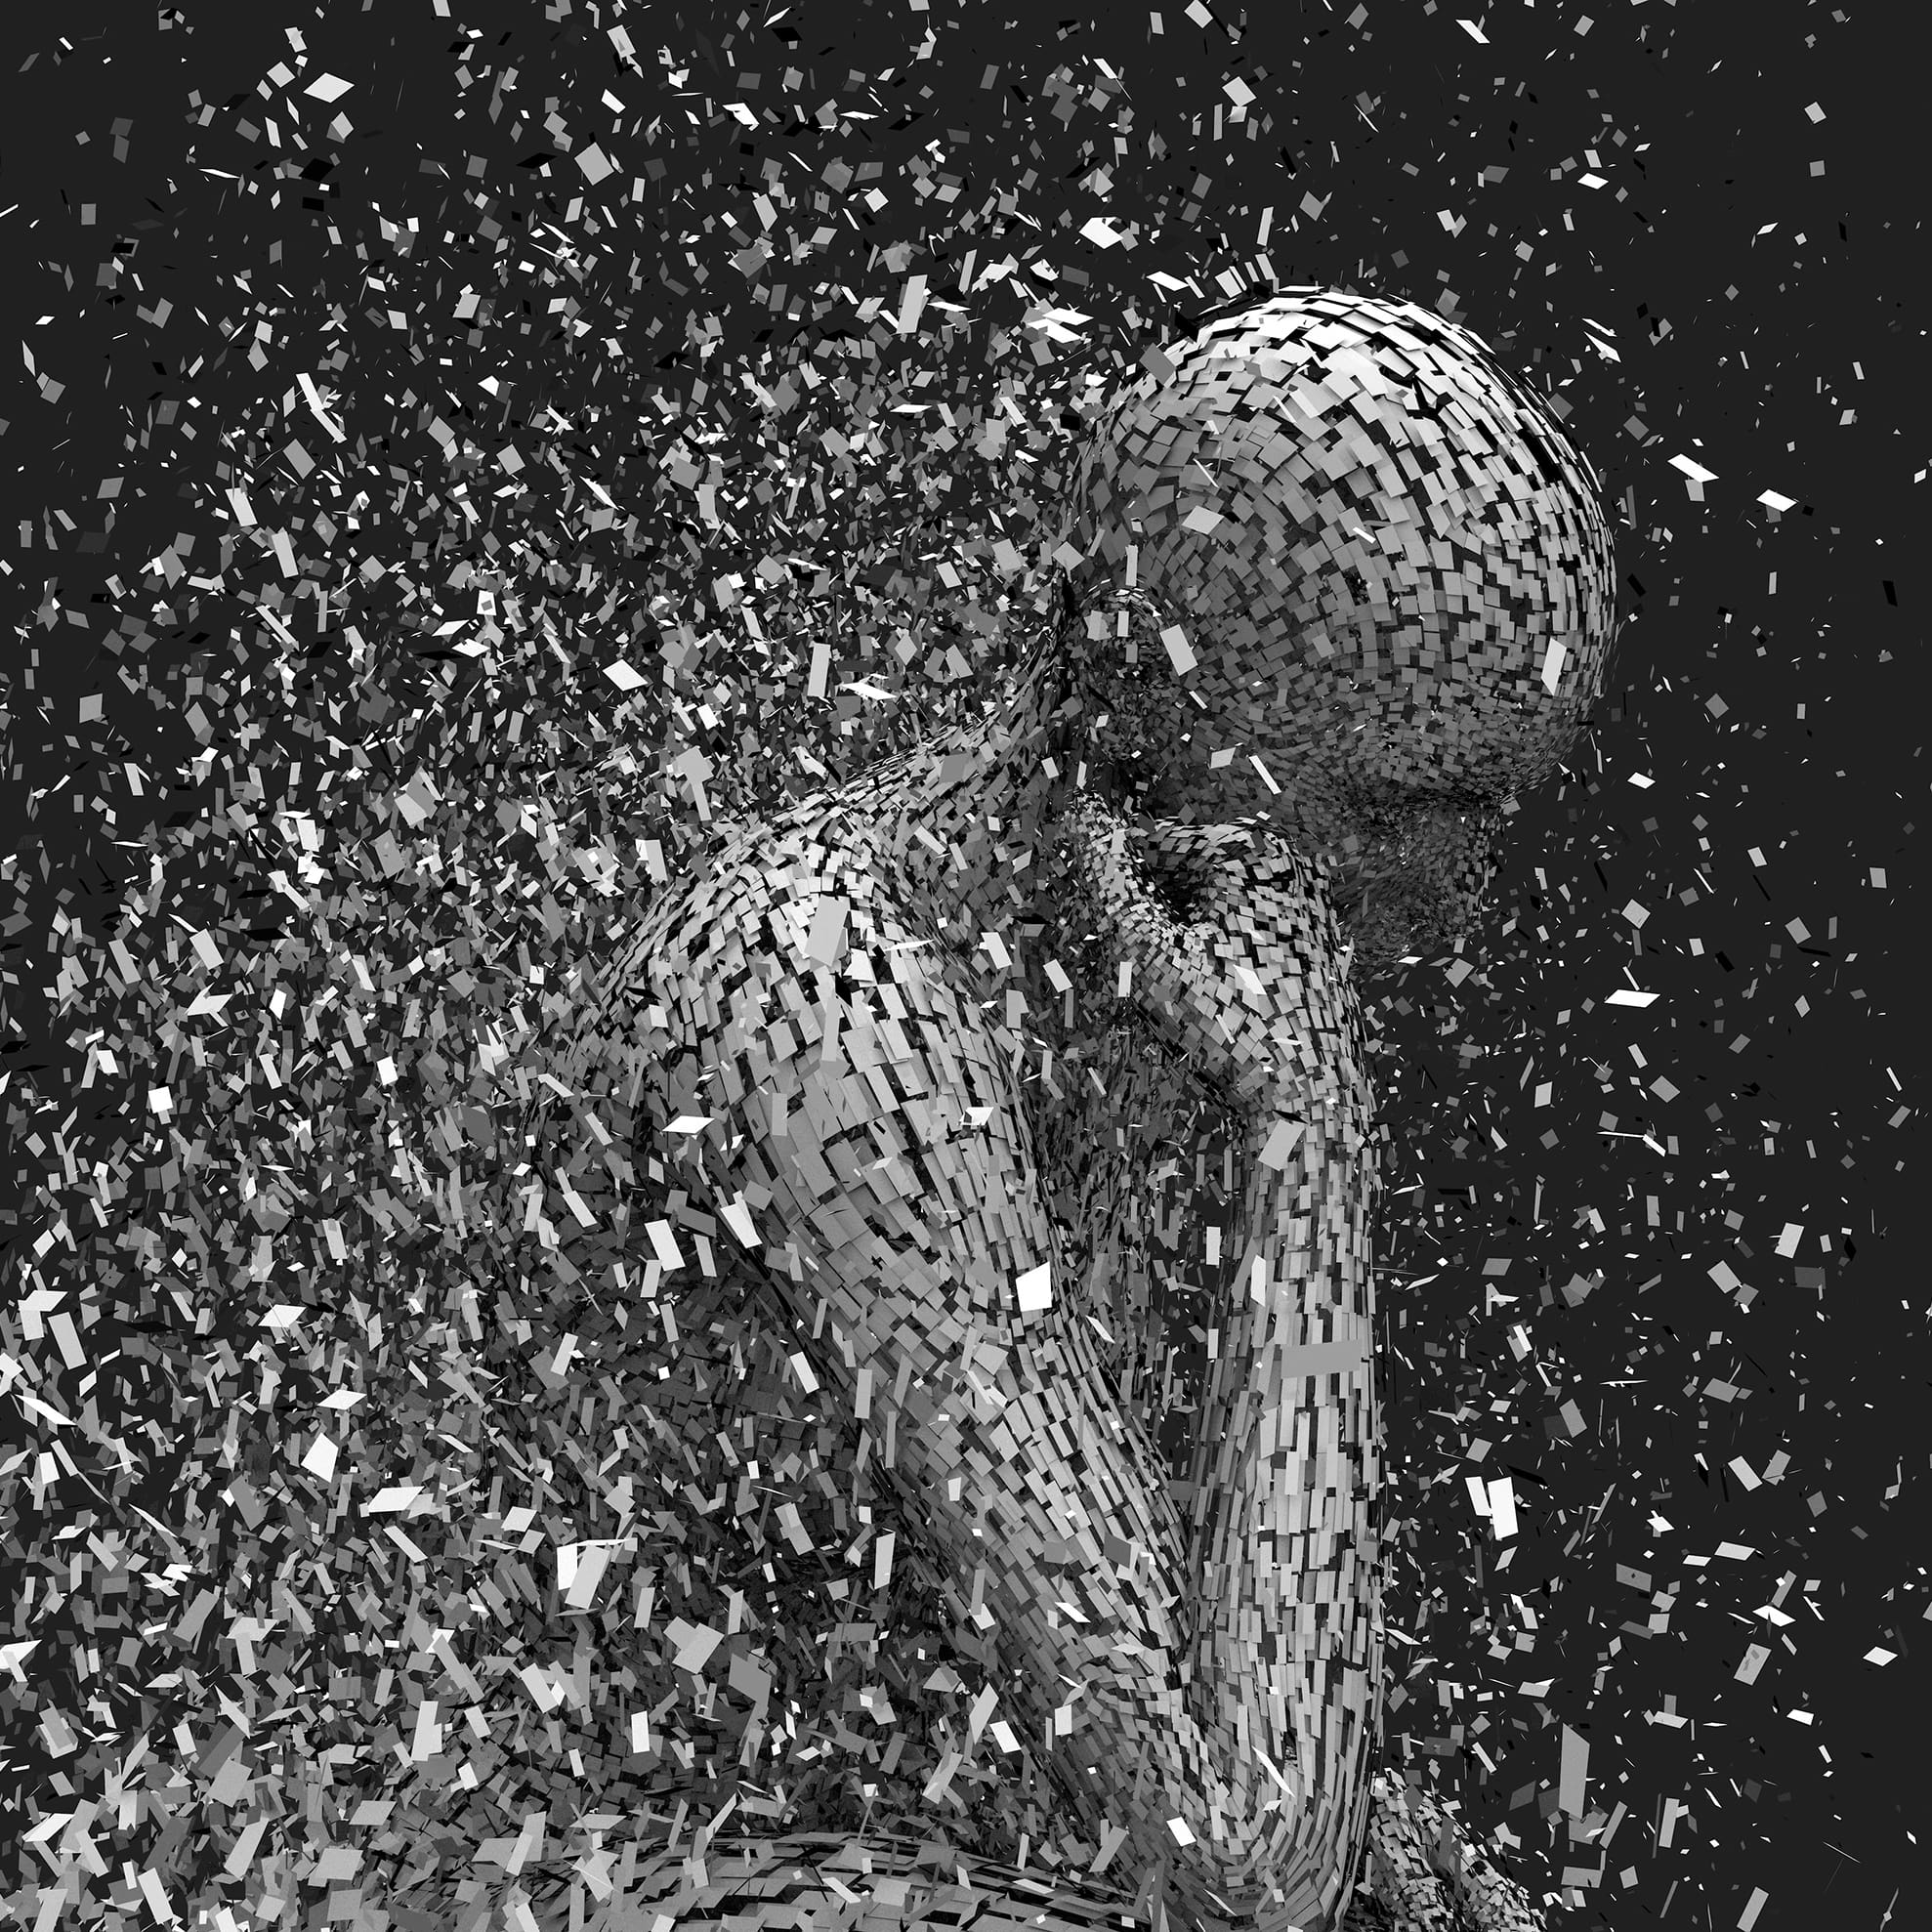 A digital art depiction of a human figure in a thinking pose, composed of numerous small, metallic-looking square fragments. The figure appears to be disintegrating or forming, with fragments dispersing into the dark background.